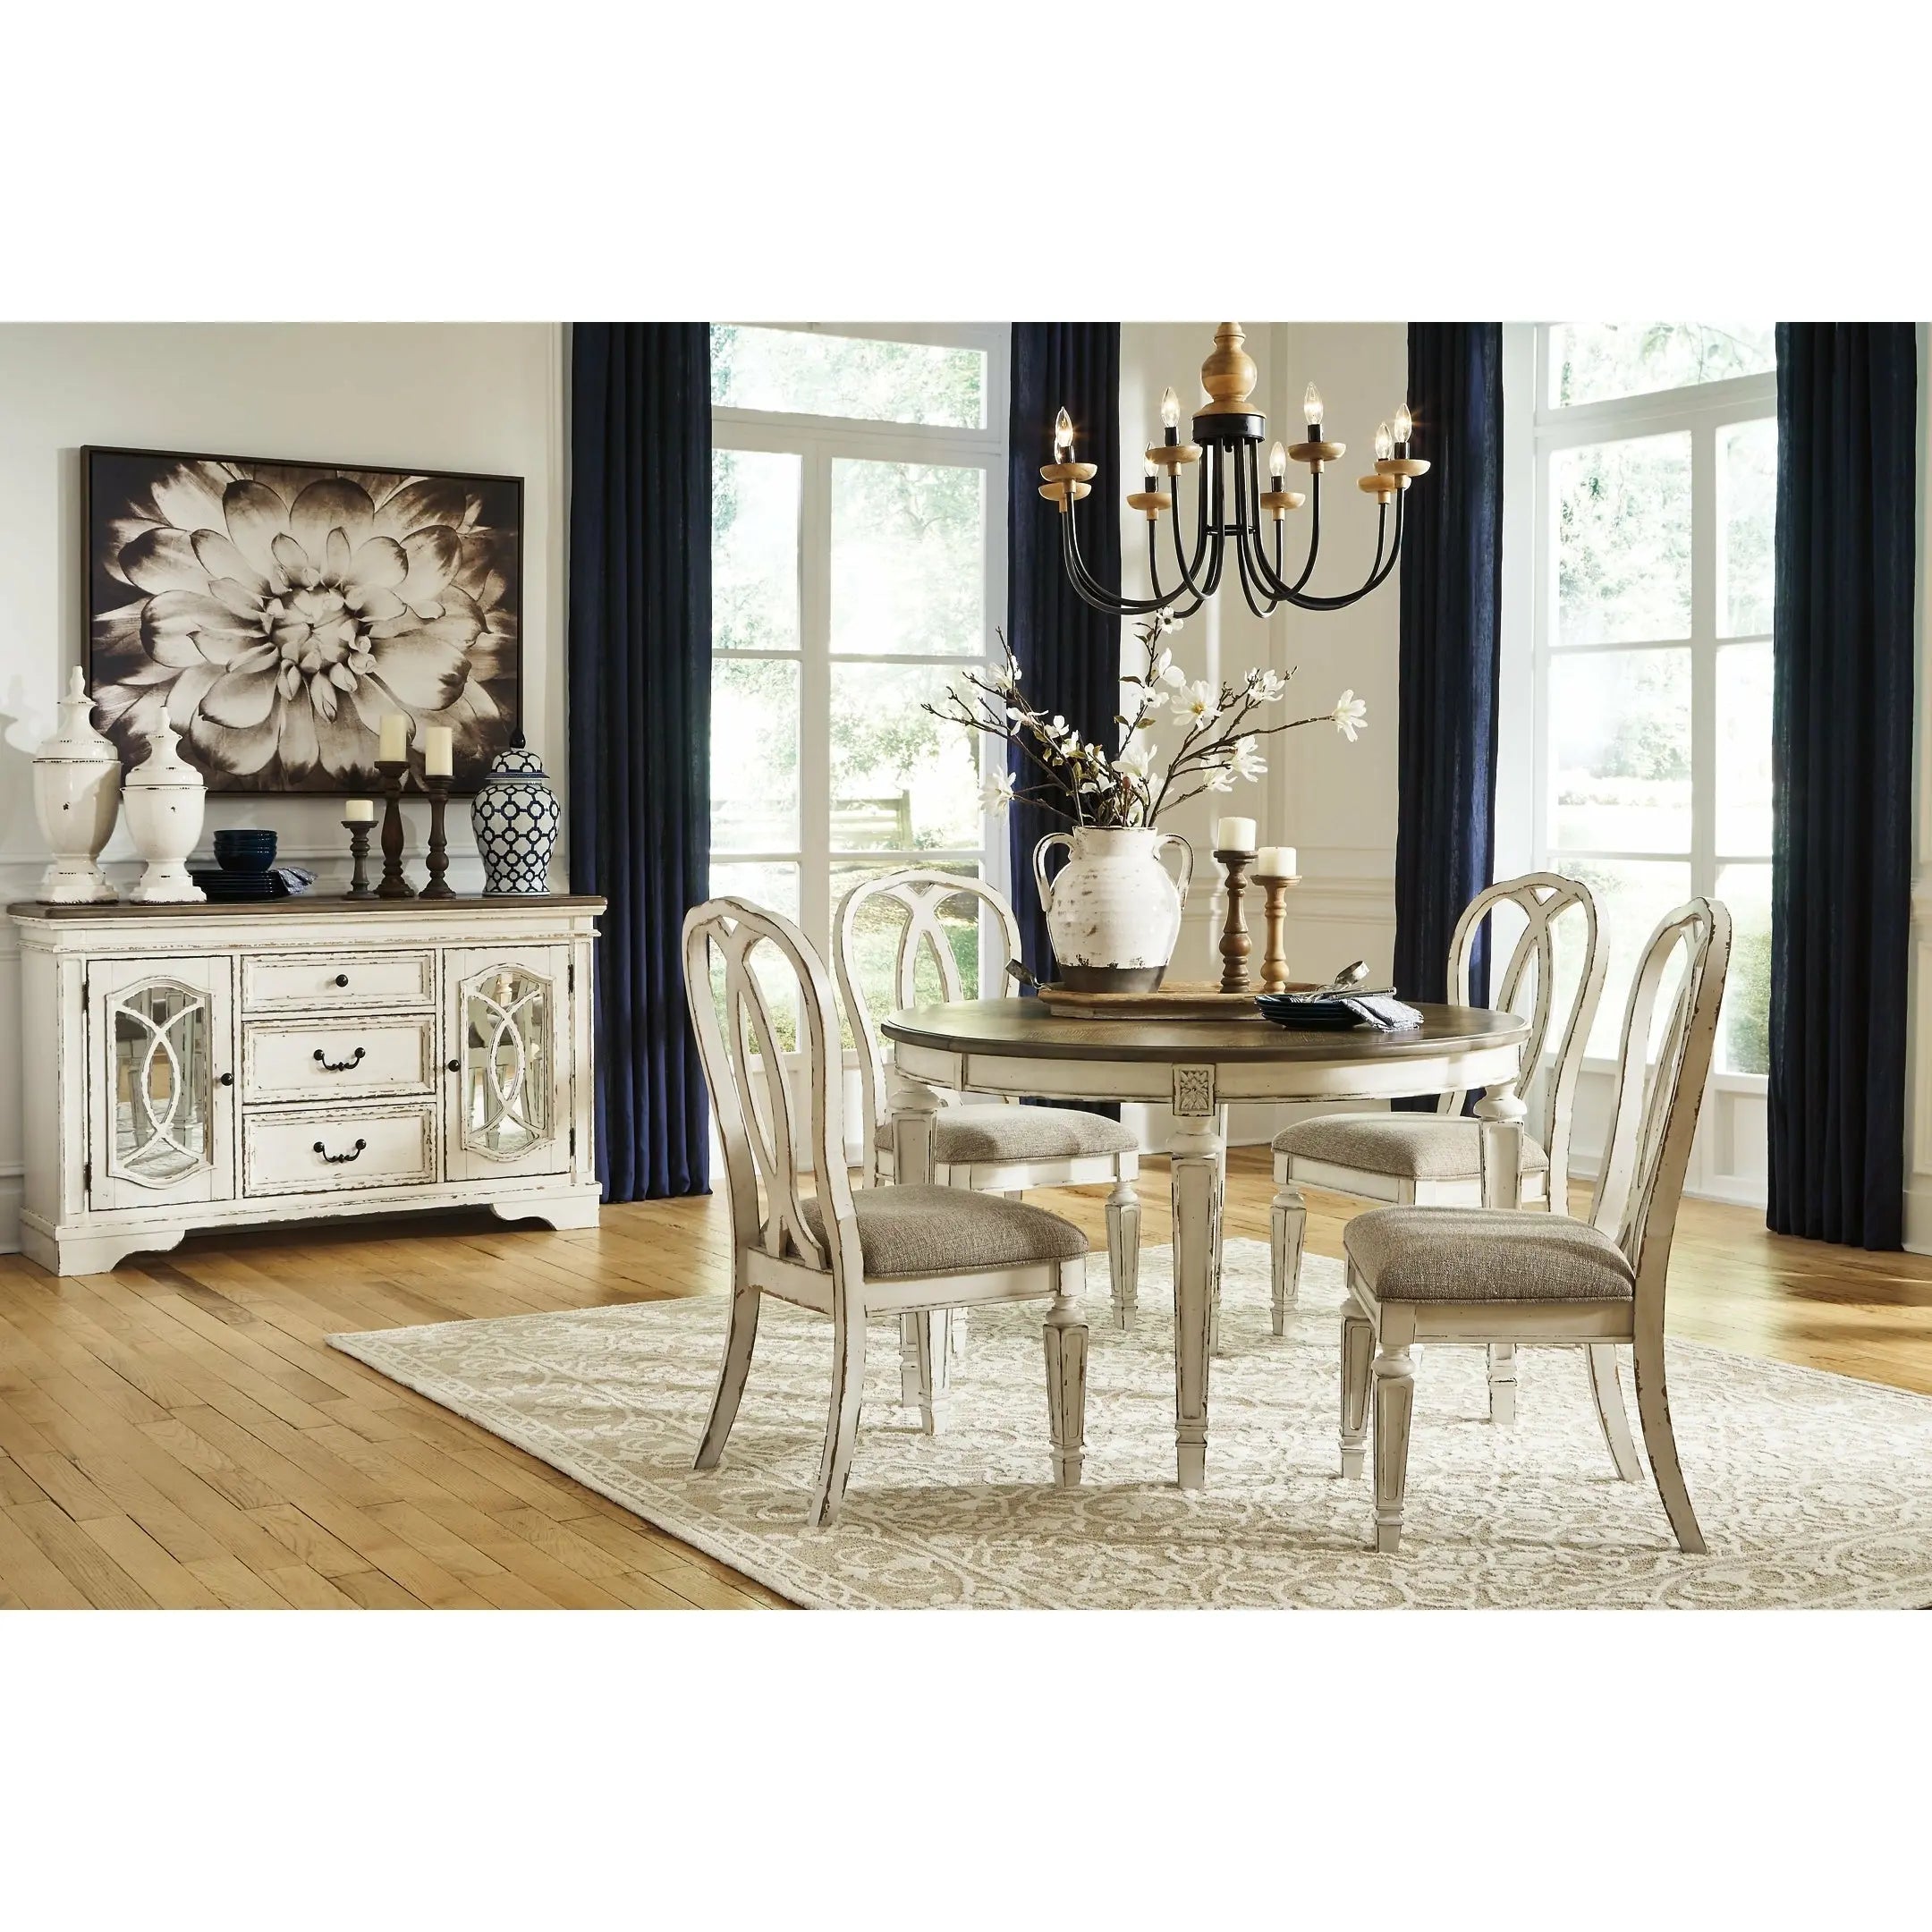 Realyn Oval Dining Room EXT Table | realyn-oval-dining-room-ext-table | DINING TABLE